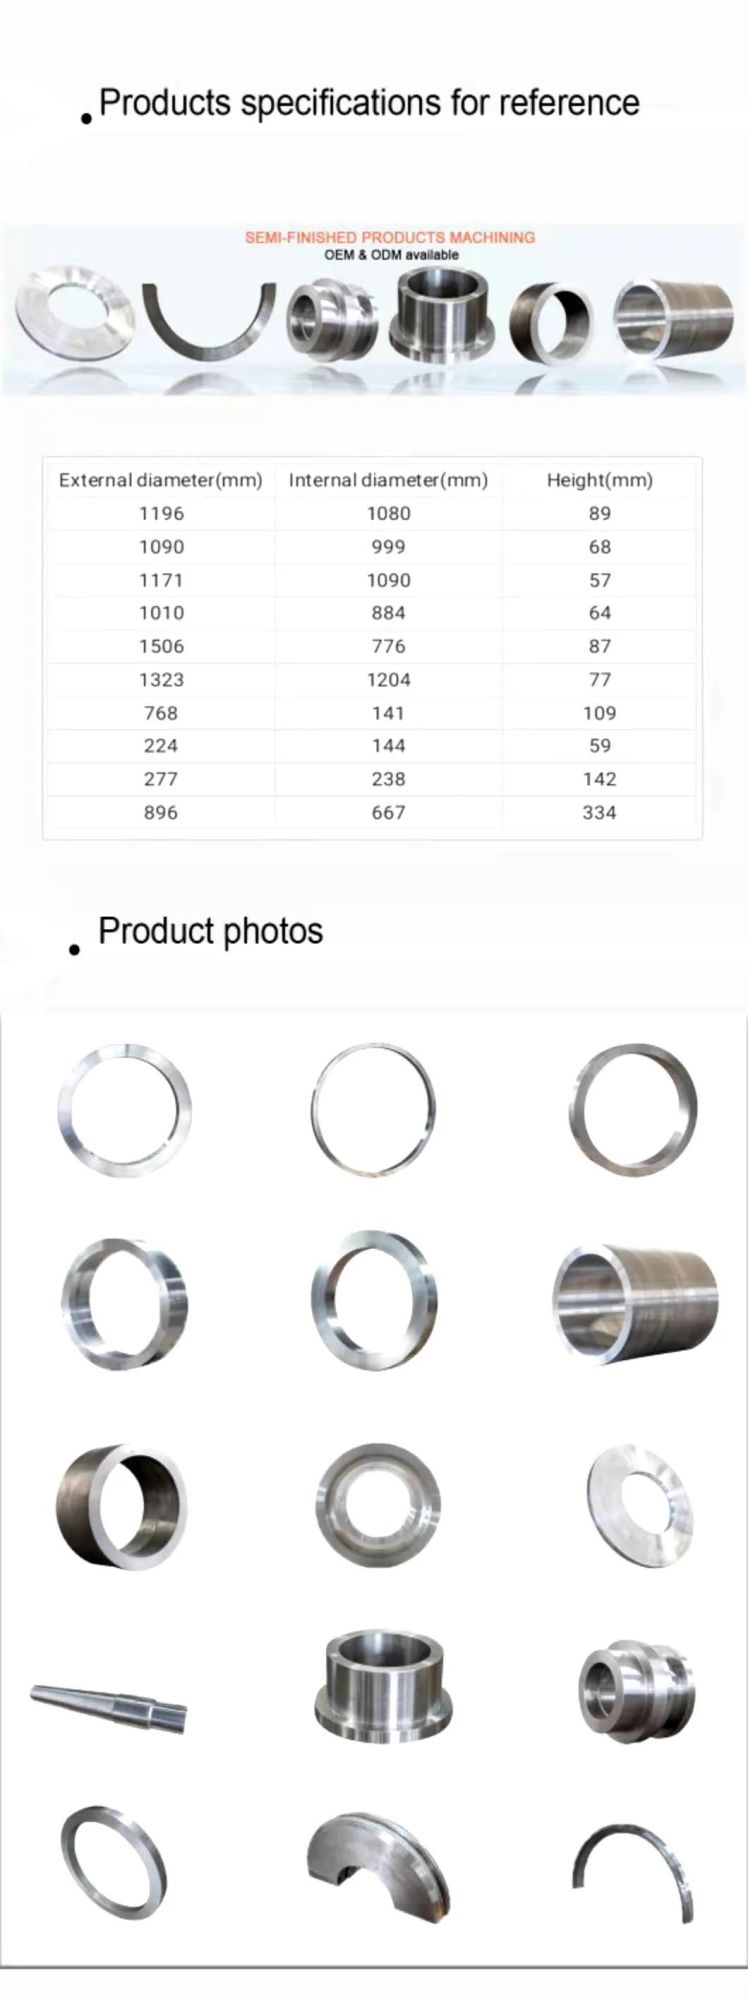 Crystallization Wheel, Casting Wheel and Casting Ring of Petroleum Industry